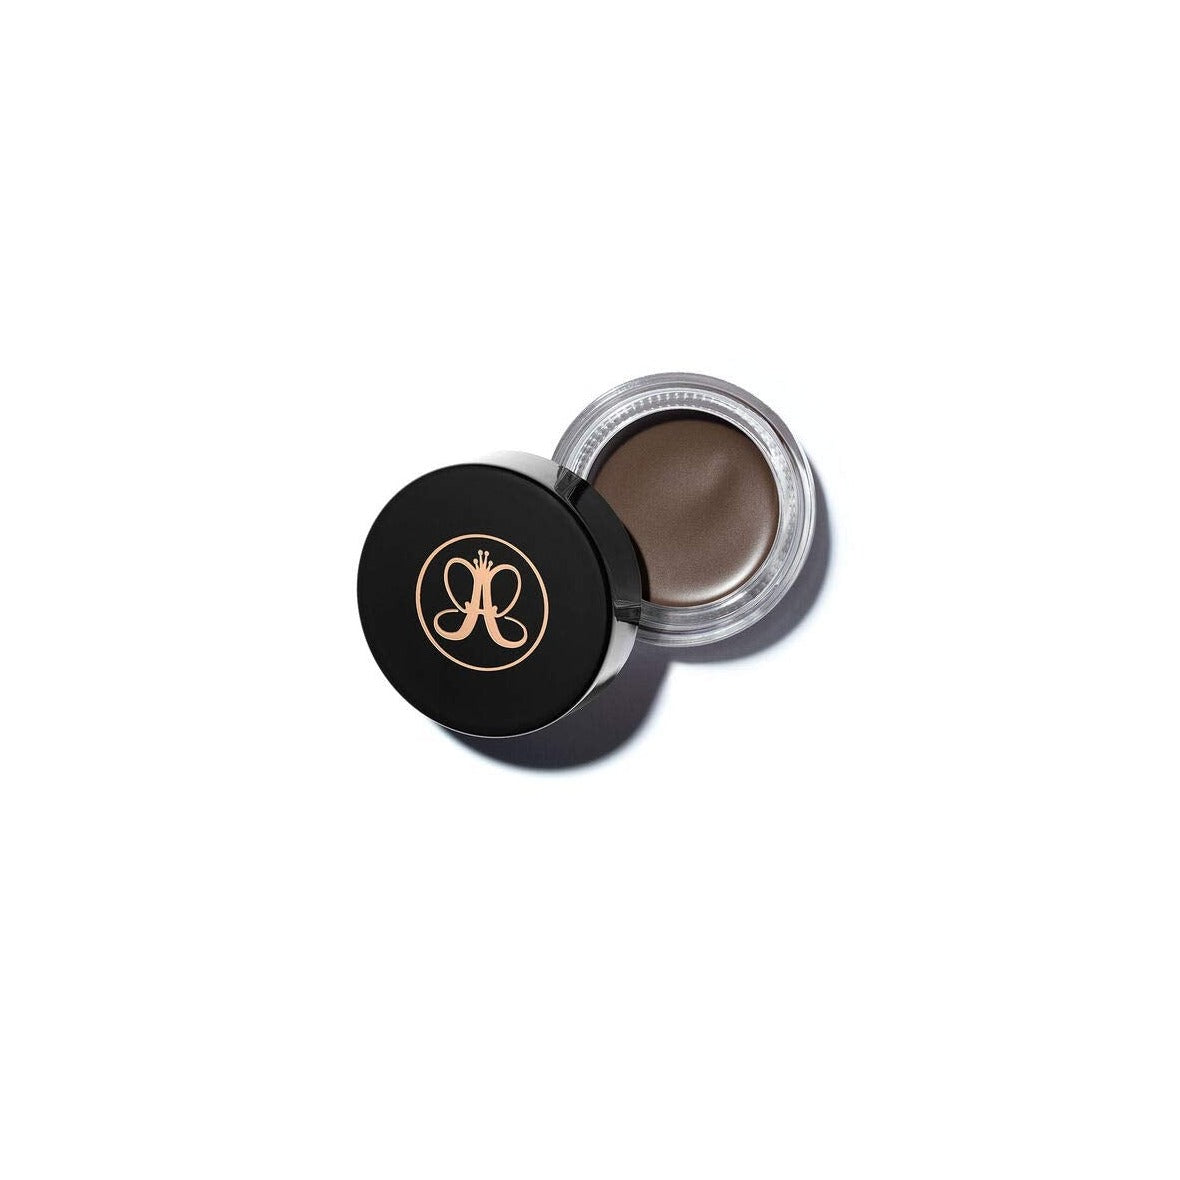 Anastasia Beverly Hills DIPBROW Pomade is a full-pigment, waterproof eyebrow pomade available in 11 shades to help fill in and detail eyebrows.  Benefits: Long-lasting and smudge-proof. High-pigment formula that glides on easily and dries fast.  Comes with a free $22 Dual-ended Angled Brow brush which gives you perfect & precise application.